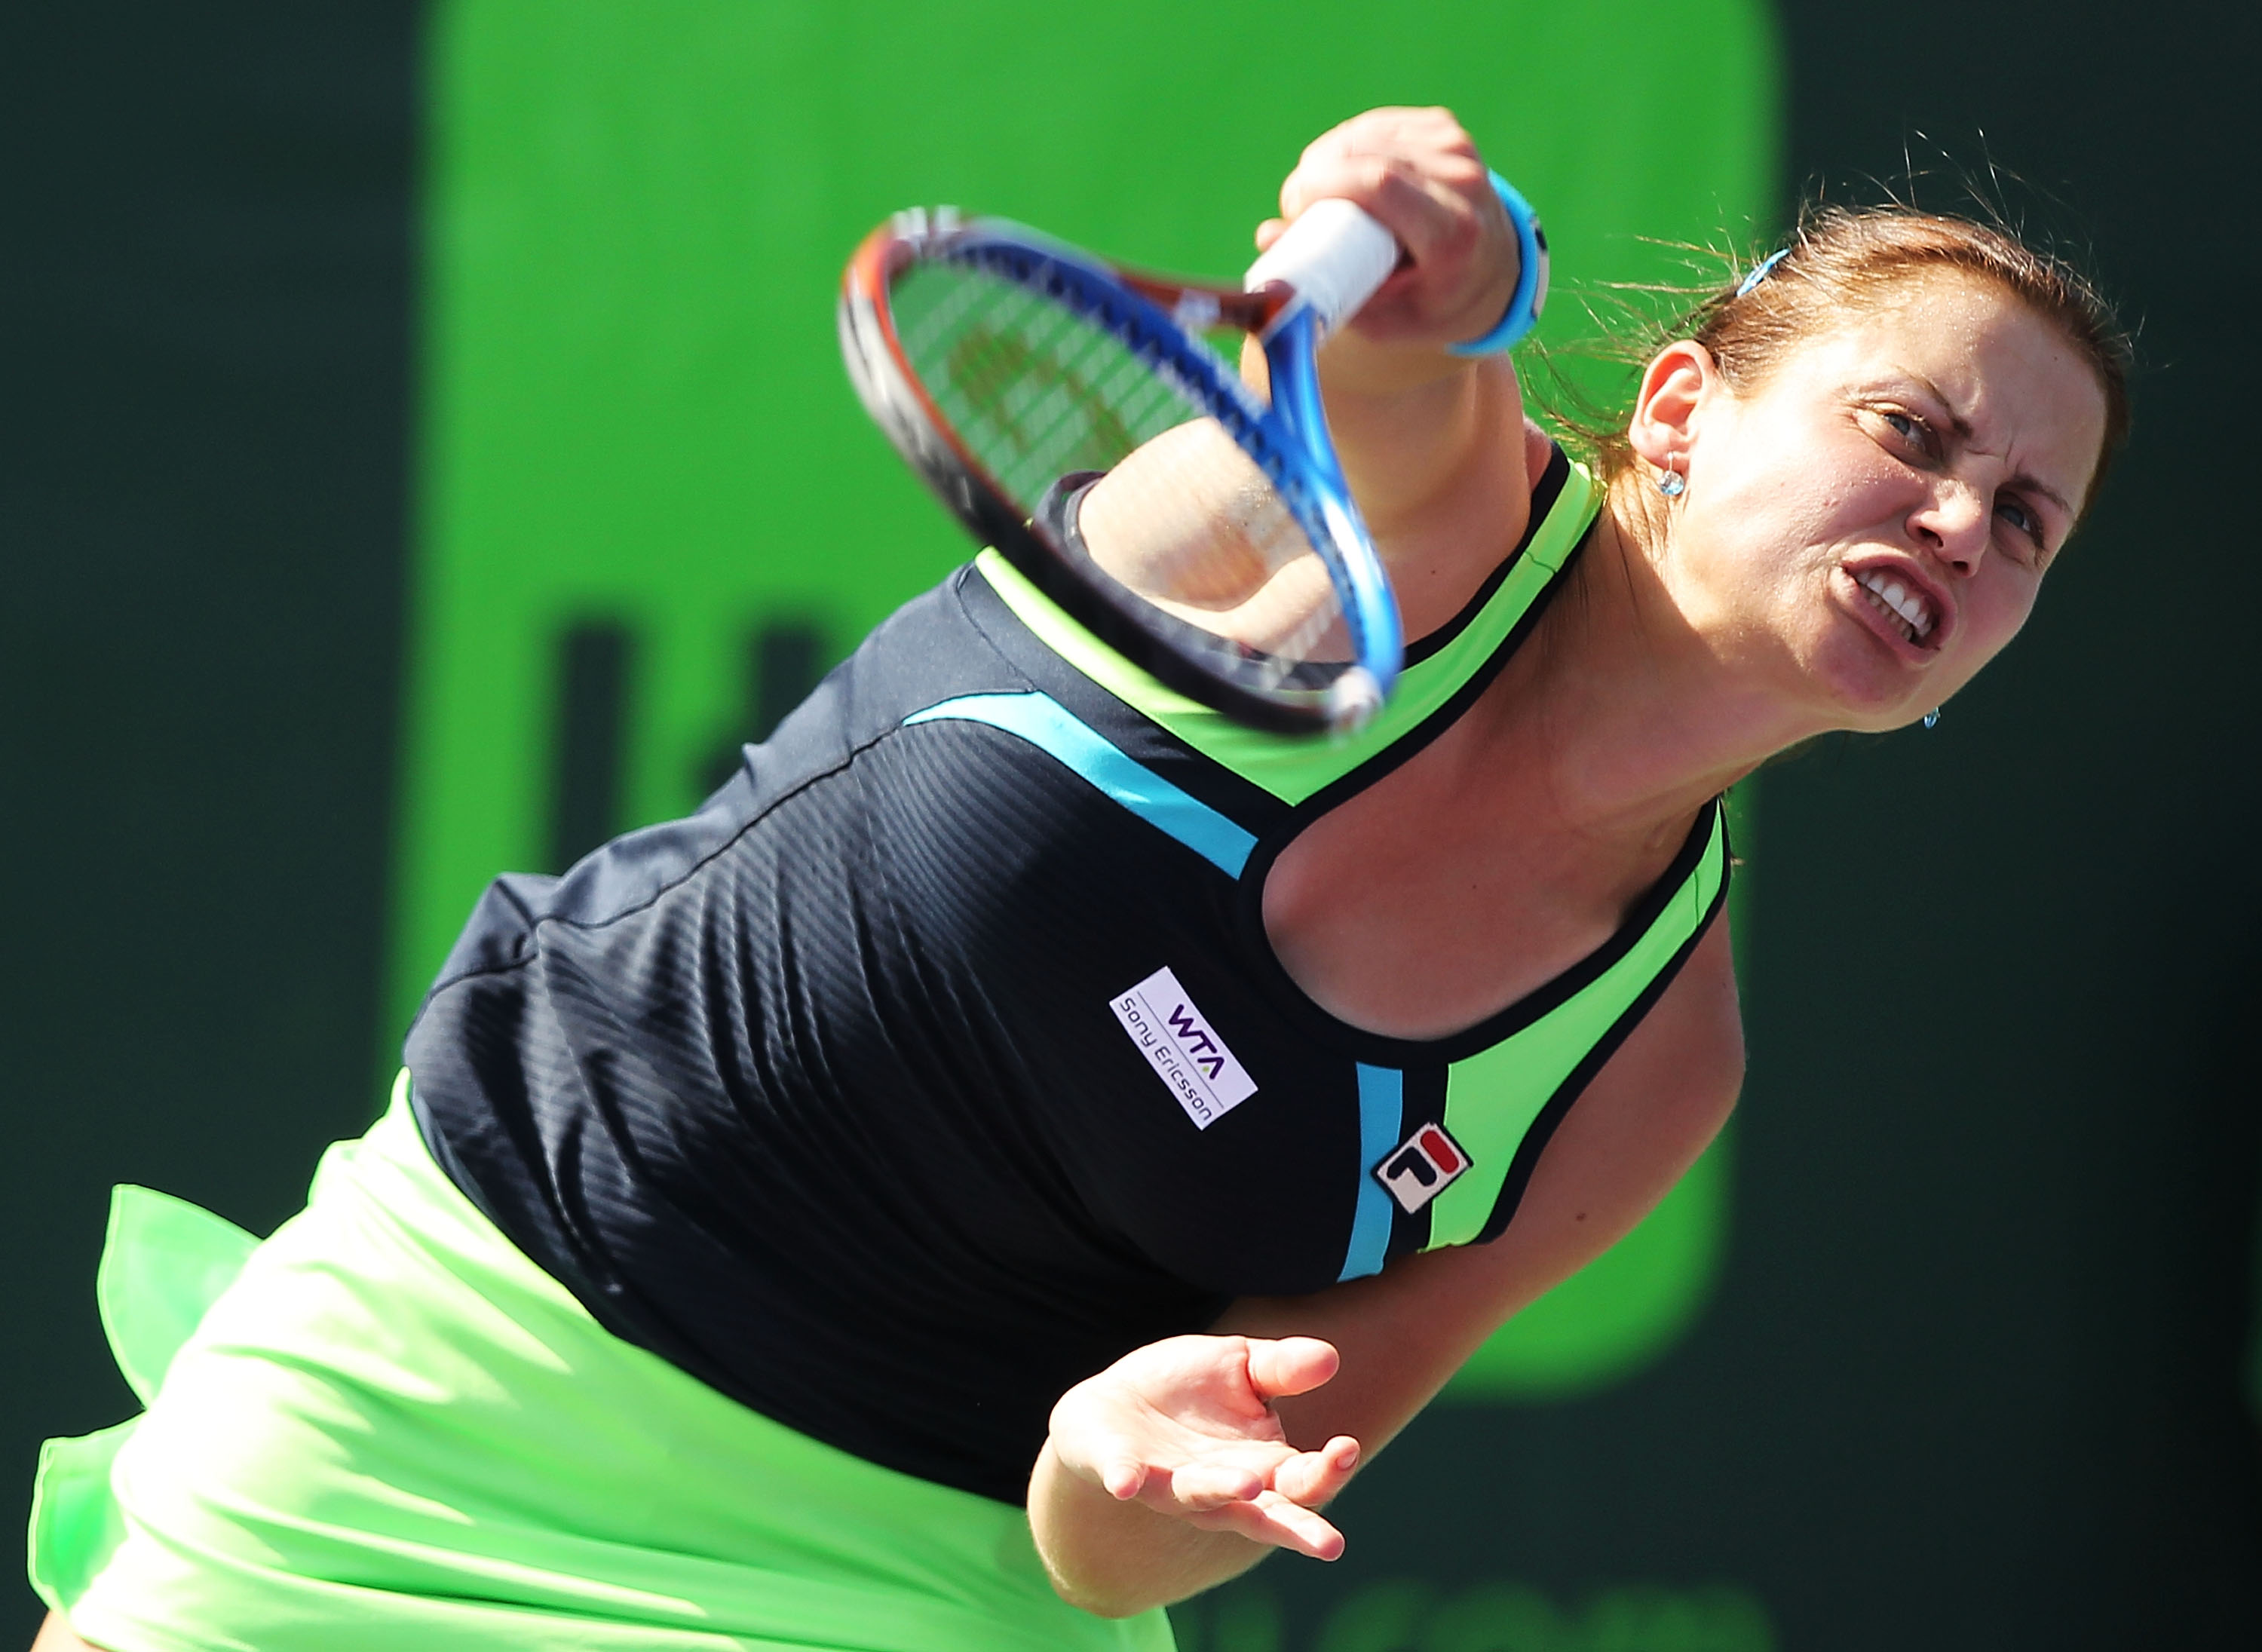 KEY BISCAYNE, FL - MARCH 22:  Jelena Dokic of Australia hits the ball against Christina McHale of the USA during the Sony Ericsson Open at Crandon Park Tennis Center on March 22, 2011 in Key Biscayne, Florida.  (Photo by Al Bello/Getty Images)